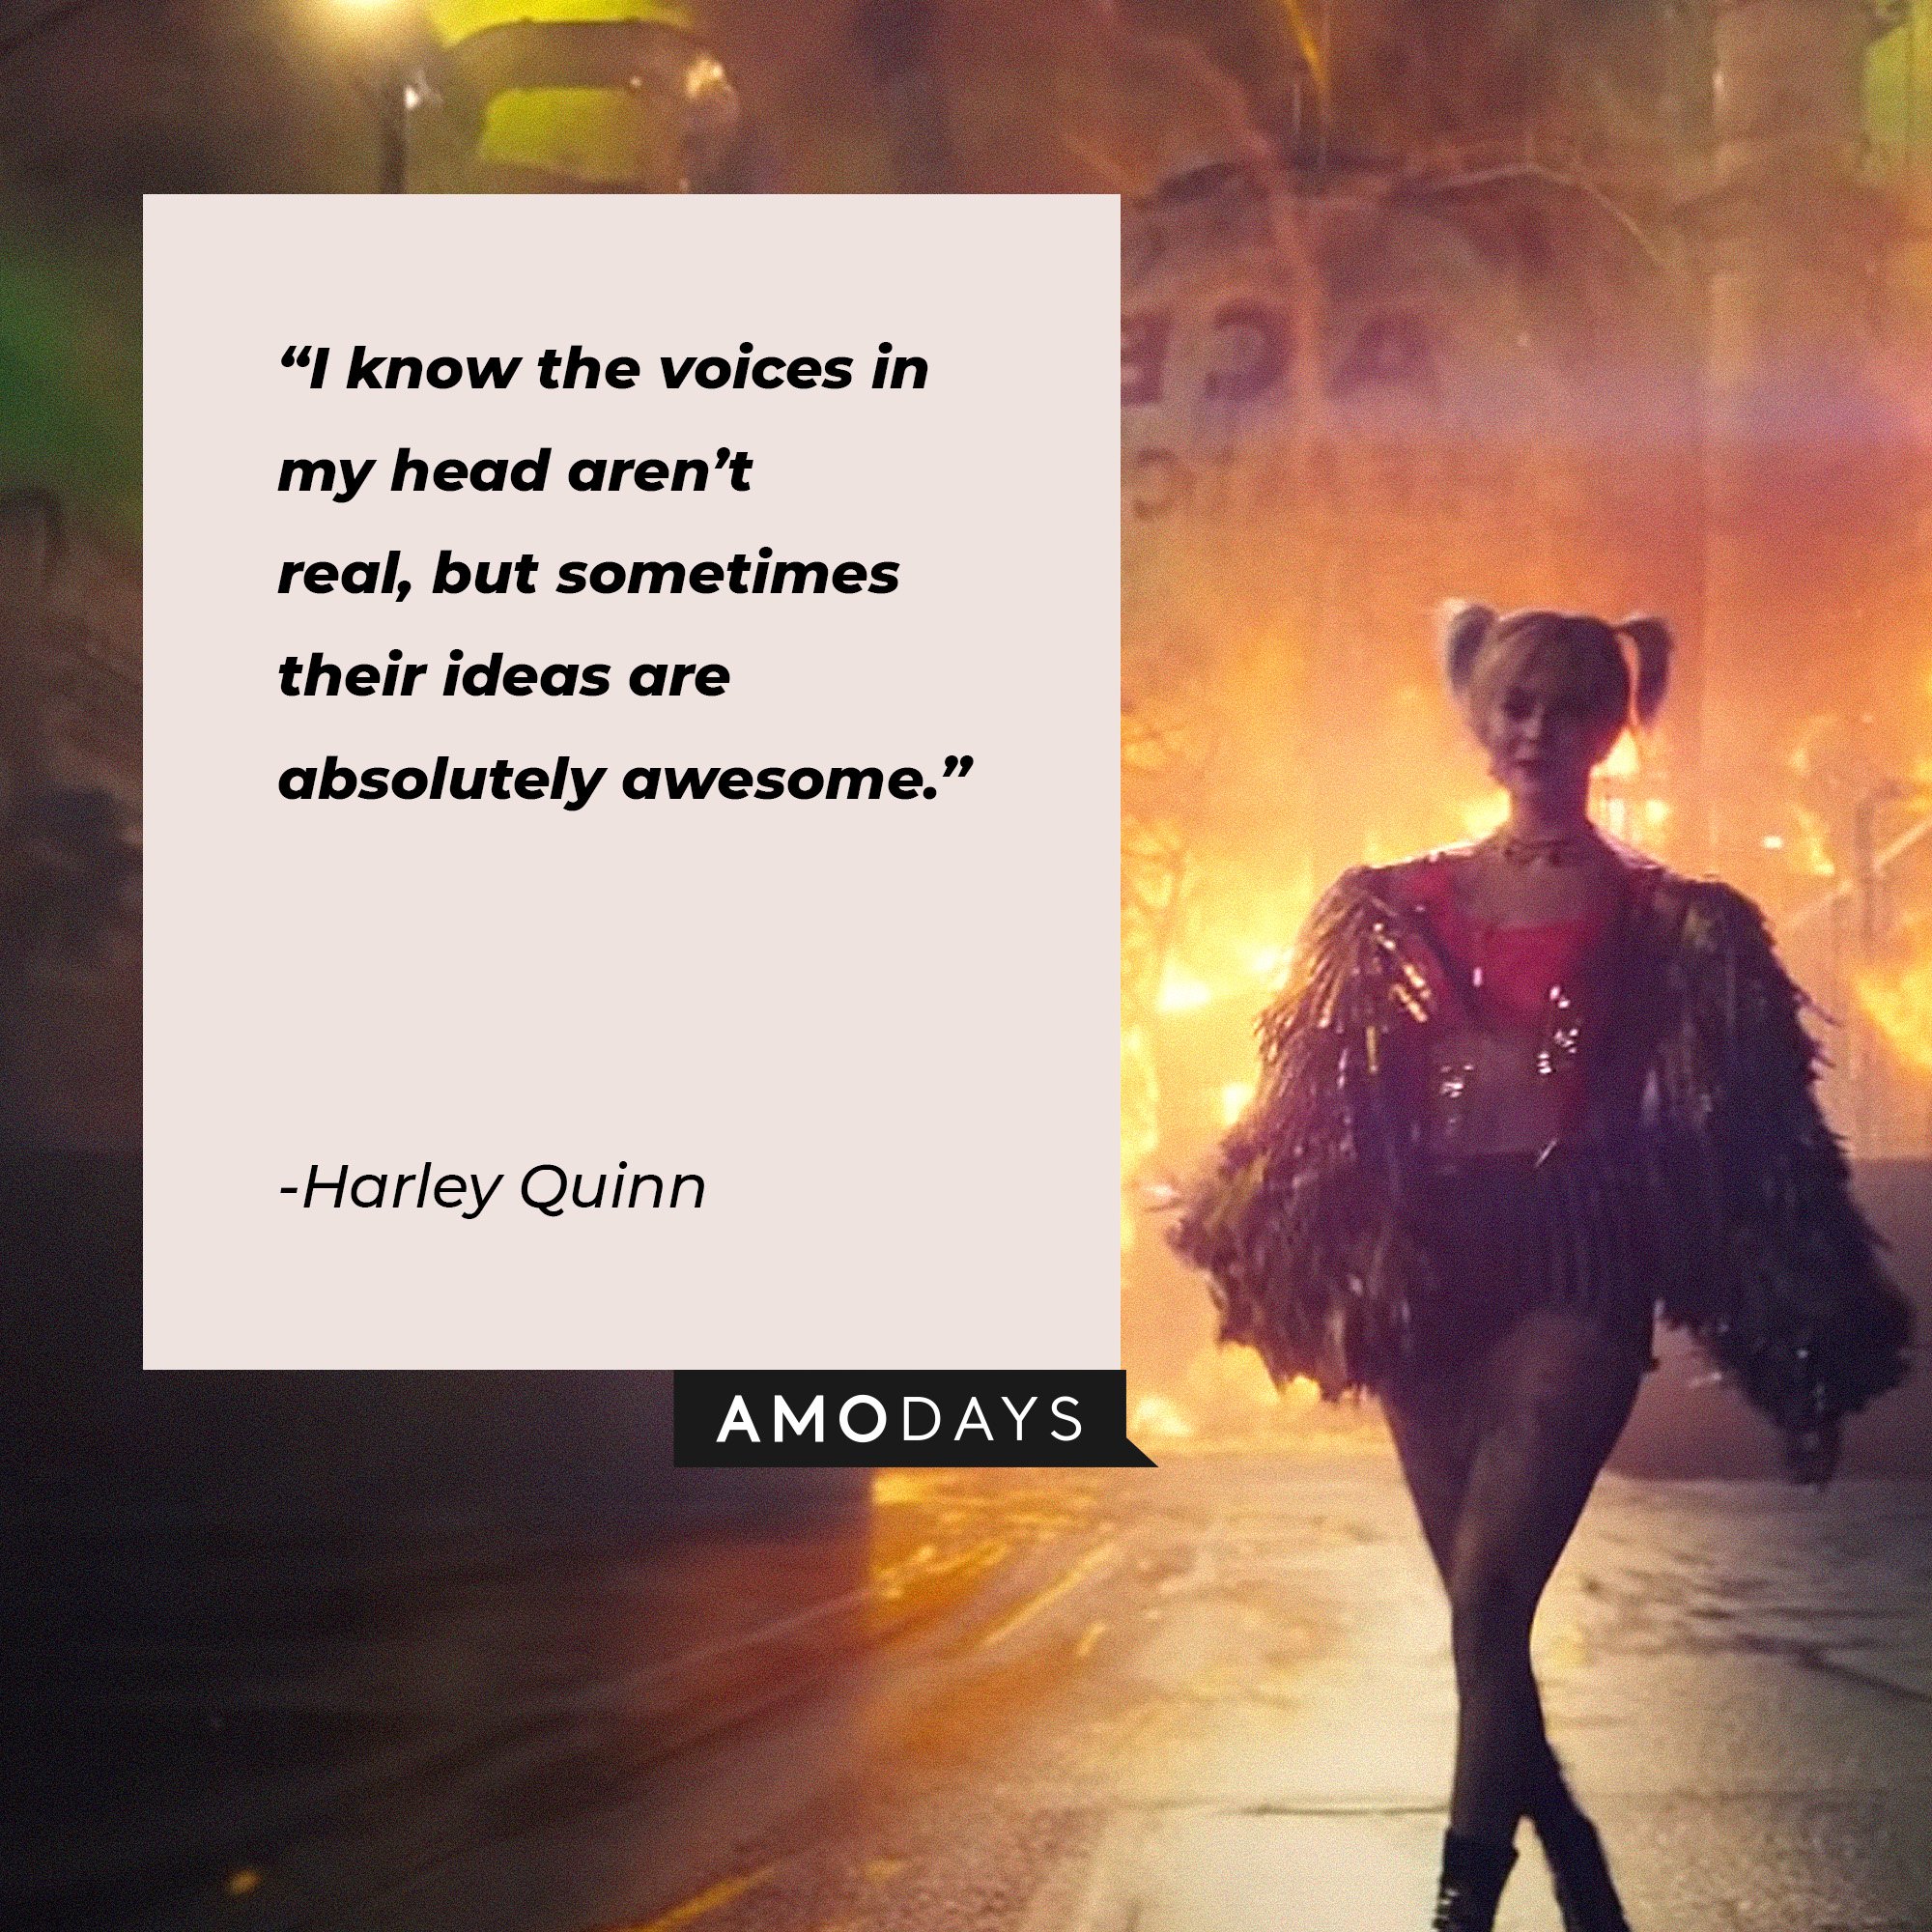 Harley Quinn’s quote: “I know the voices in my head aren’t real, but sometimes their ideas are absolutely awesome.” | Source: Image: AmoDays